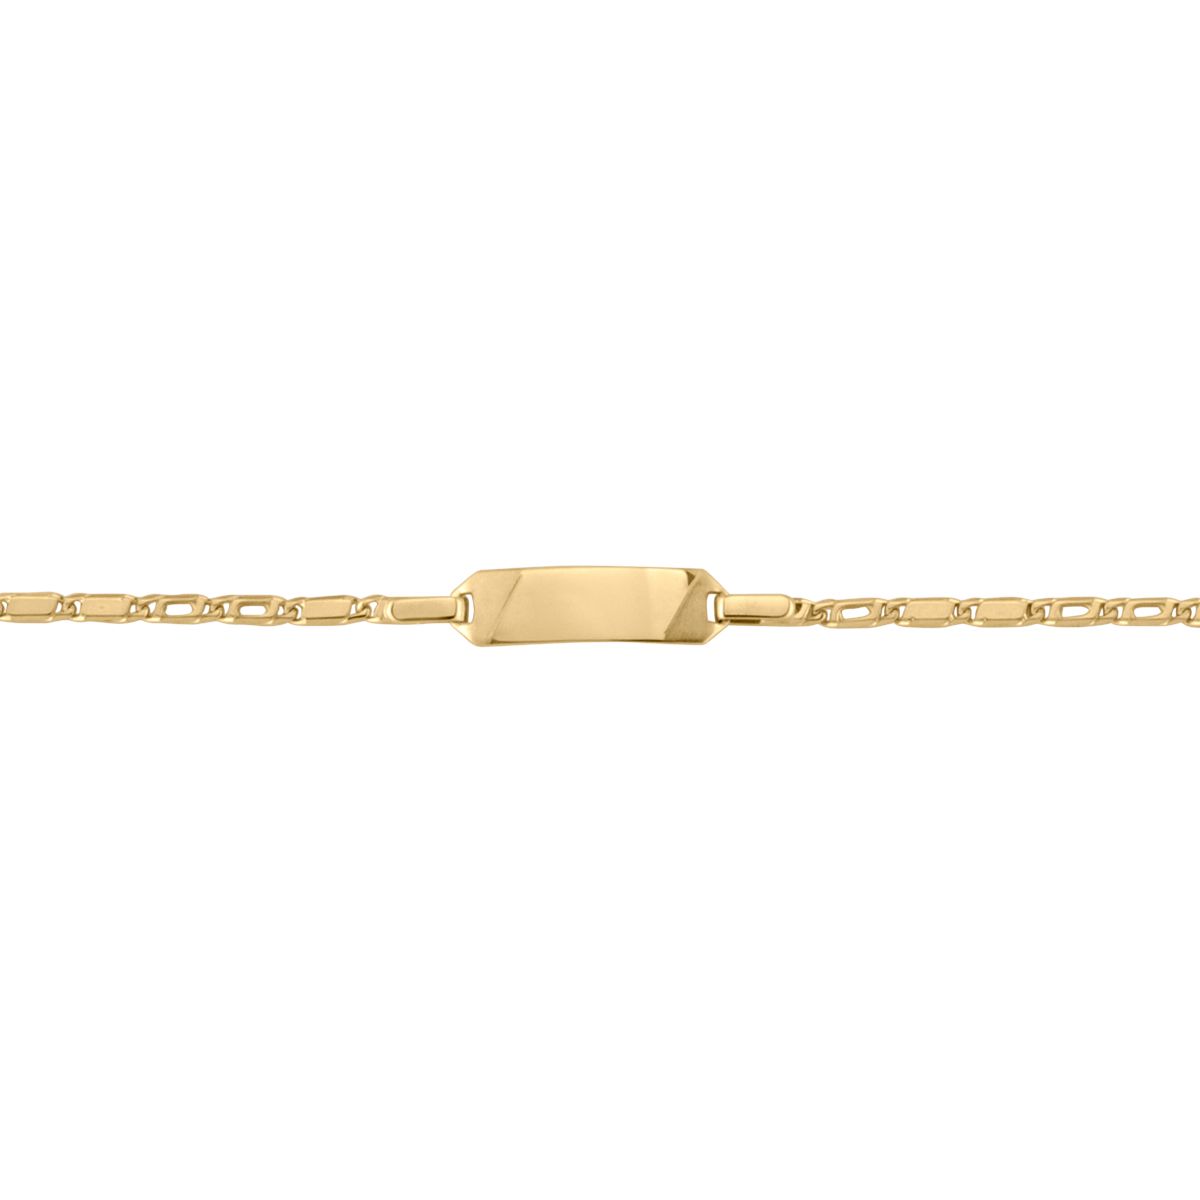 B0102, Gold Bracelet, Engravable ID, Yellow or White Gold